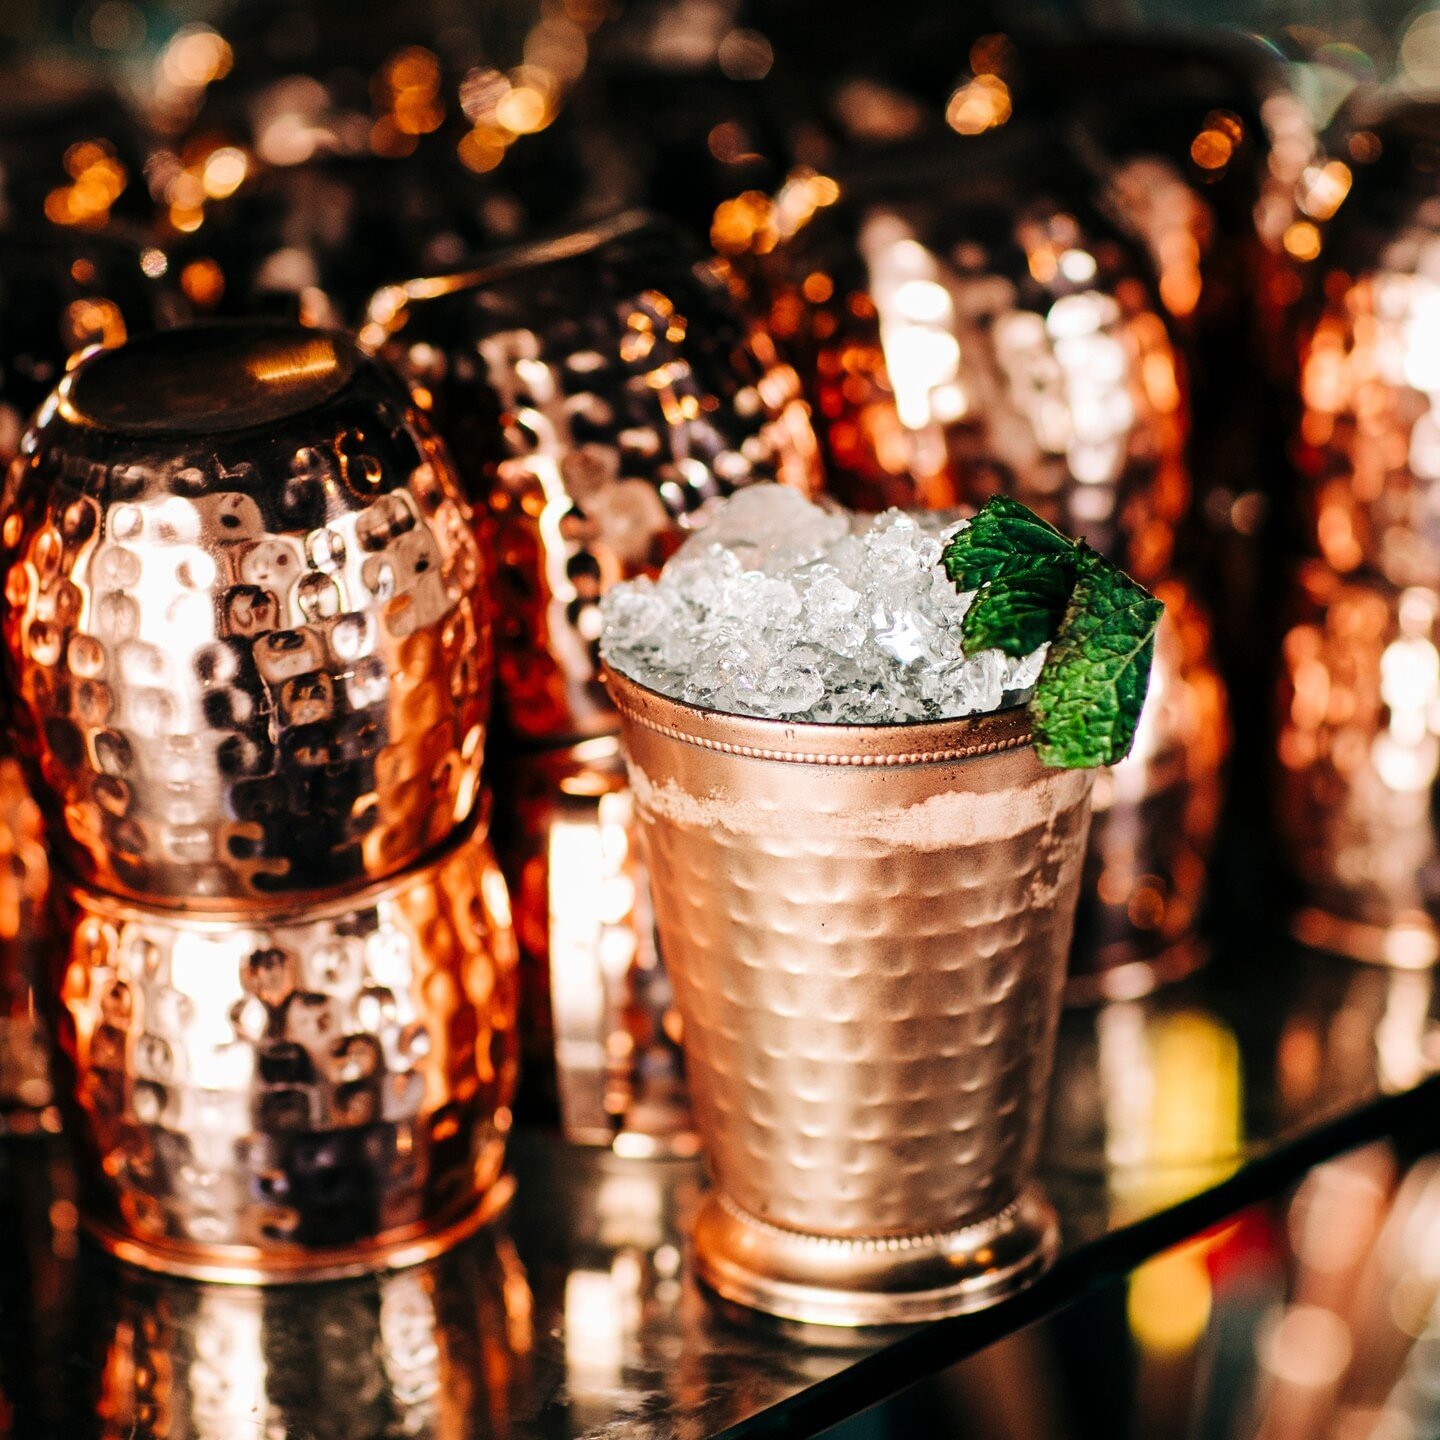 𝐈𝐓'𝐒 𝐃𝐄𝐑𝐁𝐘 𝐃𝐀𝐘!  We are here serving up Mint Juleps with Survivor's Cut Bourbon all day!  Stop by The Lounge from 11am - 9pm to sip on this classic.⁣⁠
⁣⁠
What's happening at EOD? ⁣⁠
@rudebwoysjerkbbqfoodtruck 5pm - 8pm⁣⁠
@wearethegraes 6:3